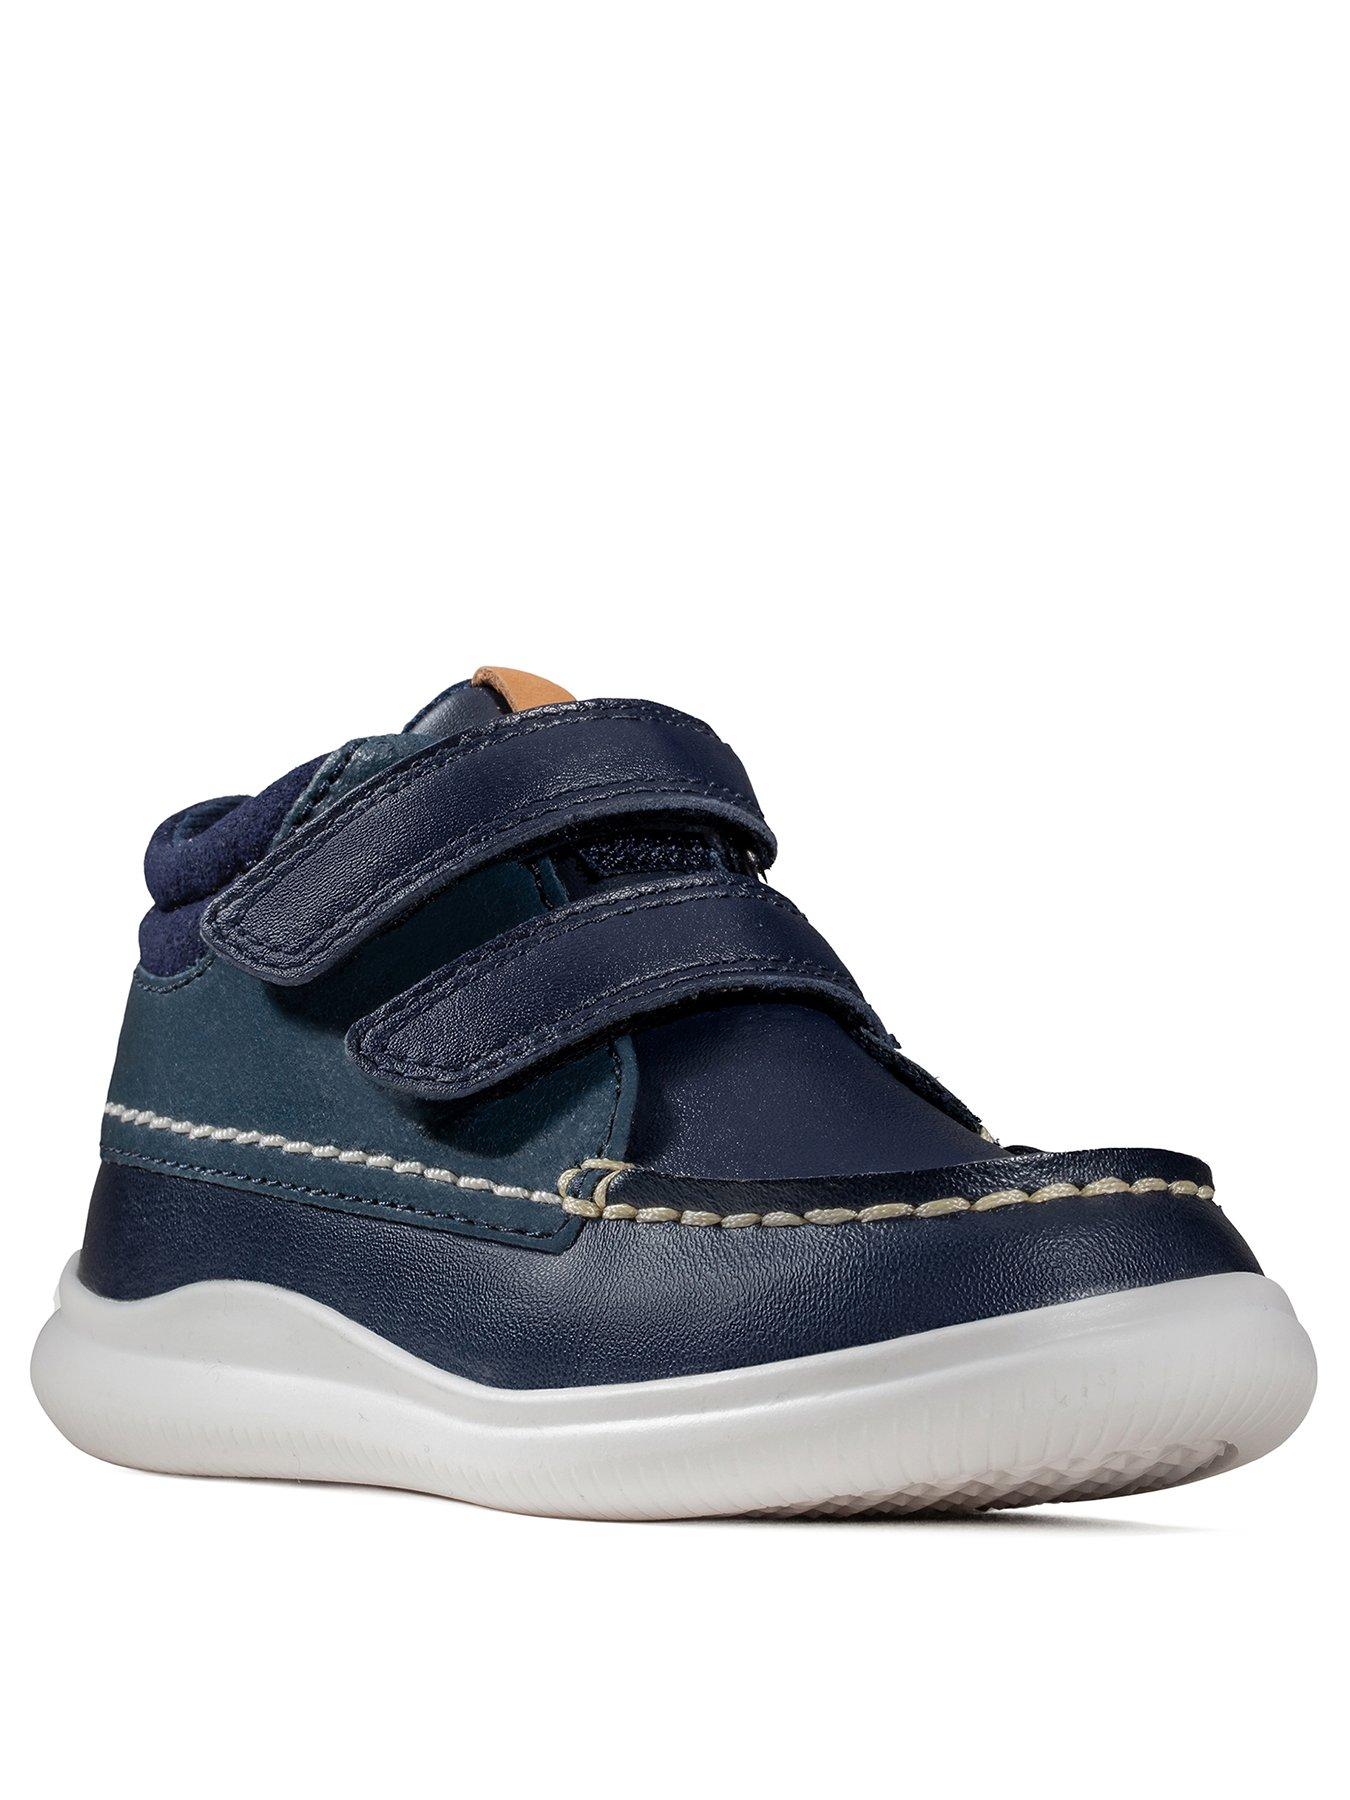 clarks uk baby shoes